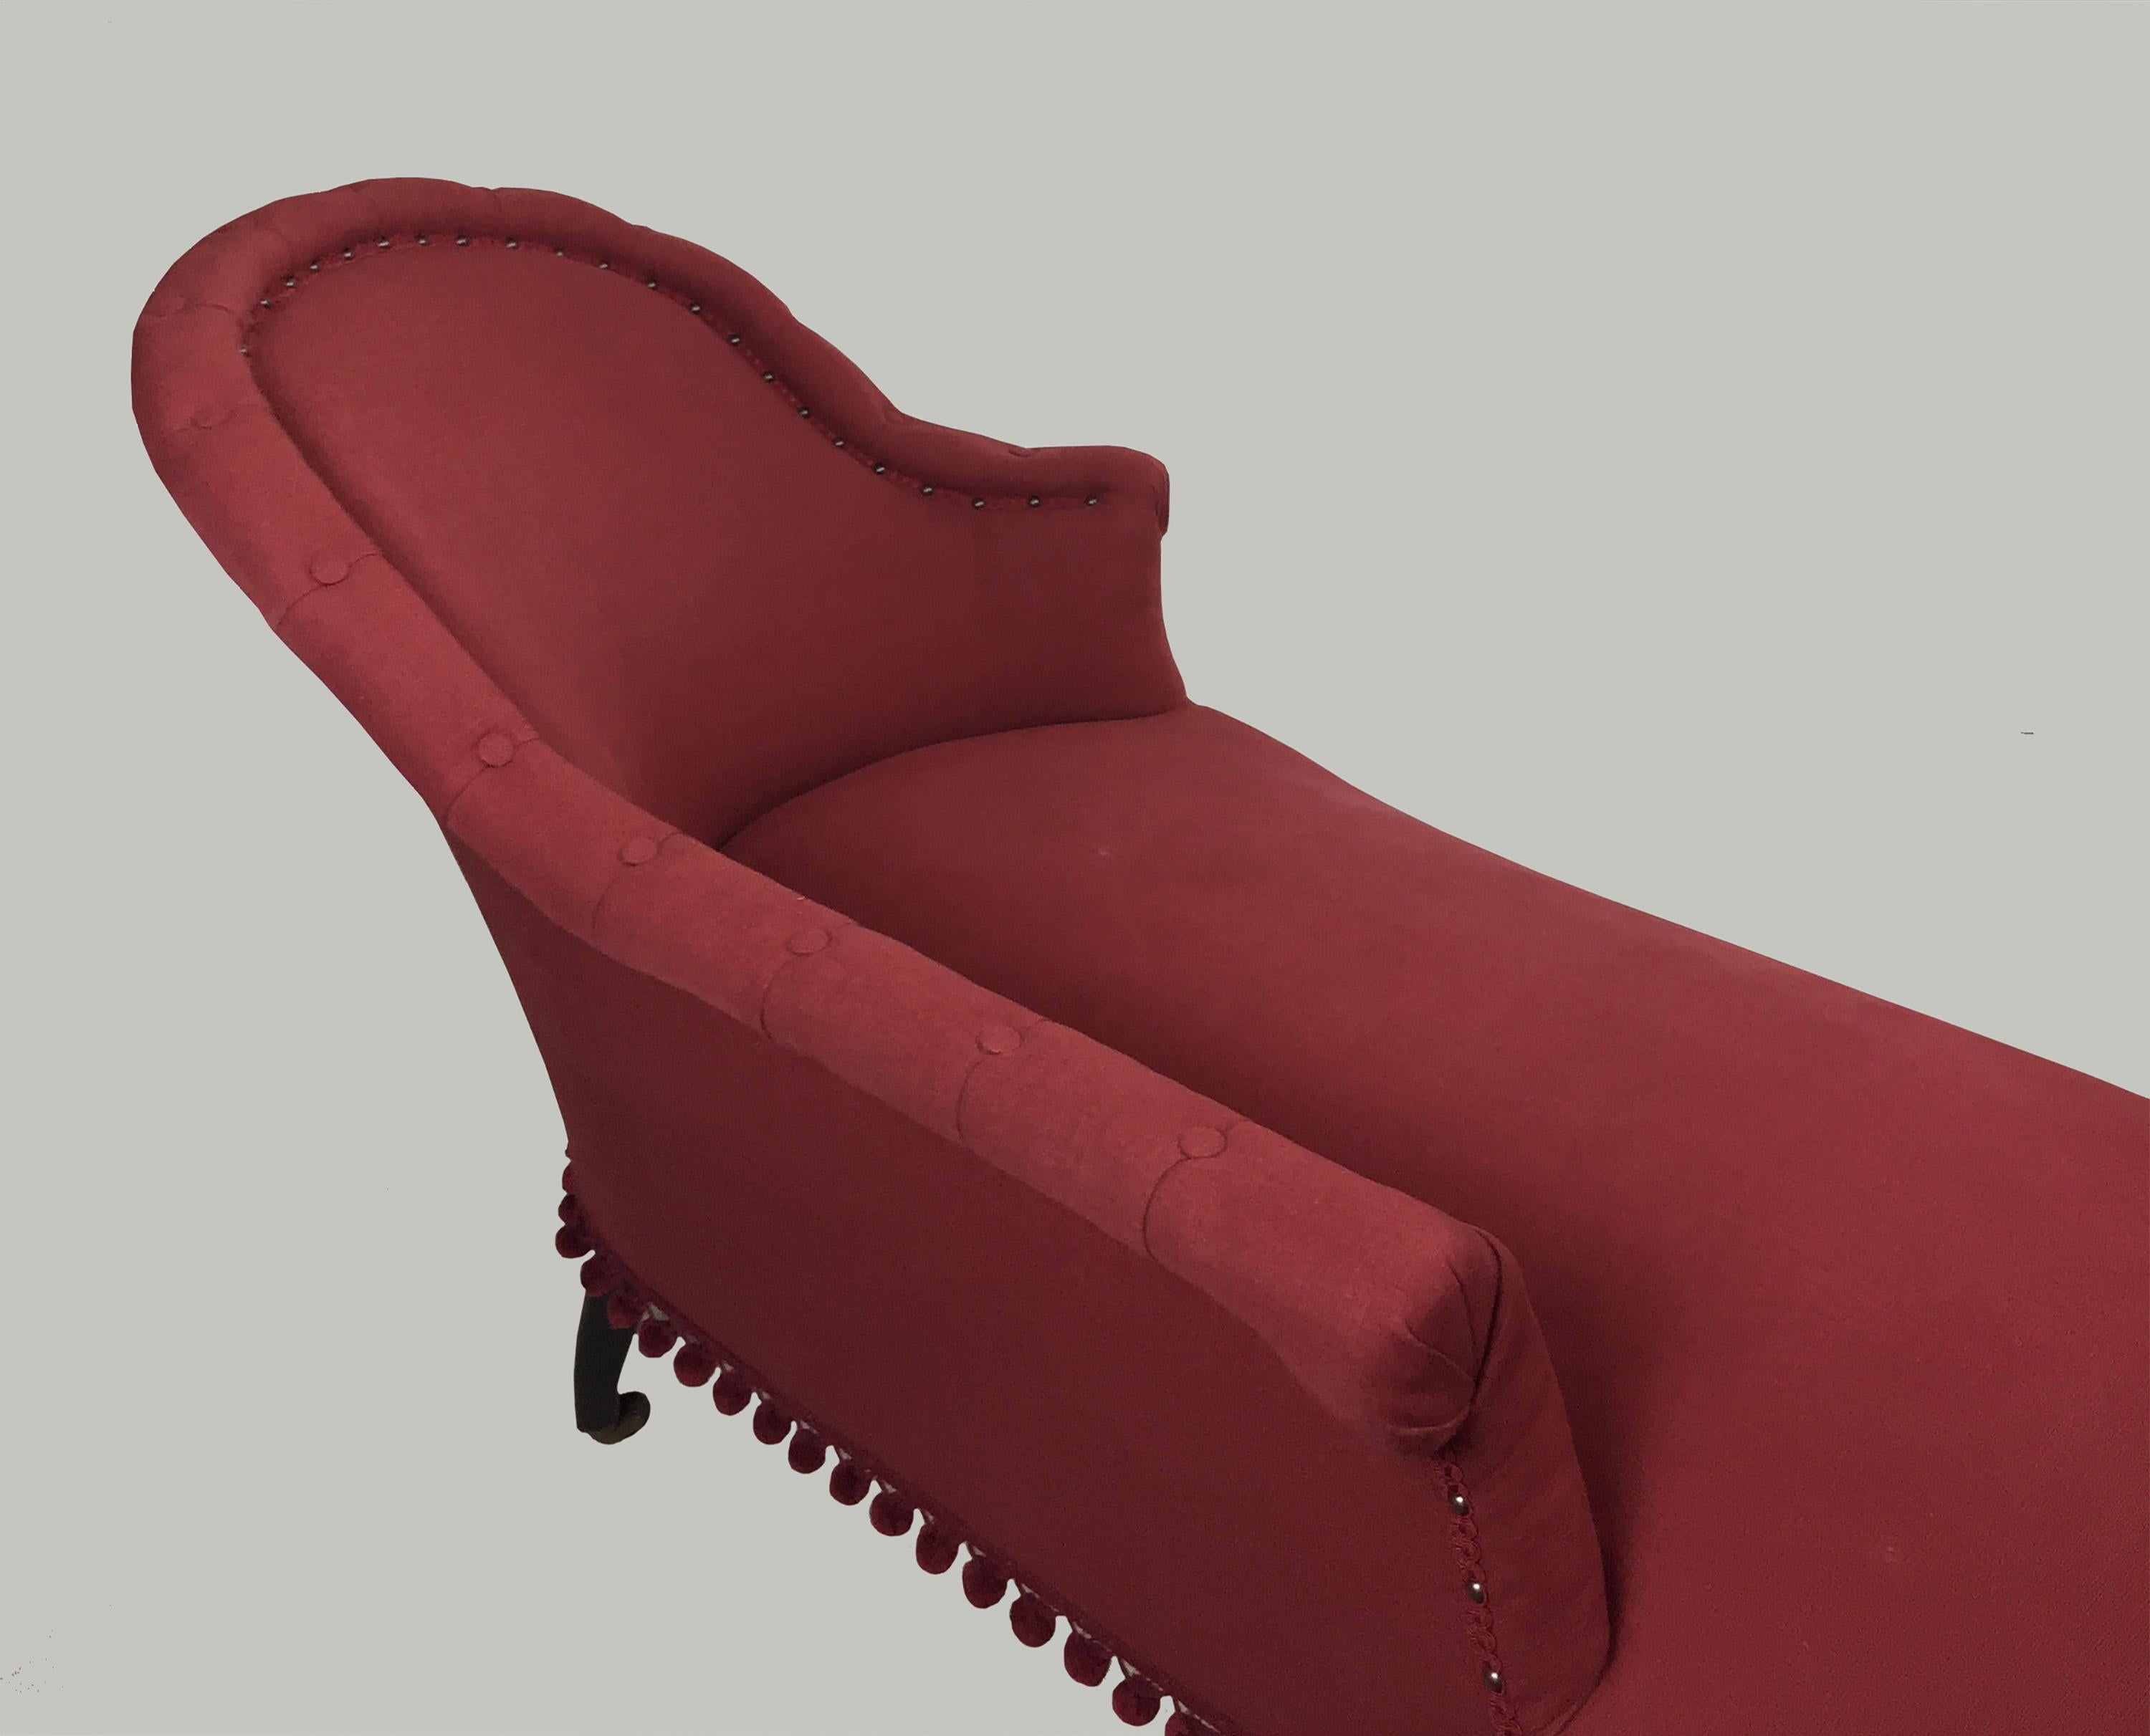 Late Victorian chaise longue in the traditional Meridienne shape, upholstered in dark prink fabric. Upholstered in the 1980s with bobble fringing.